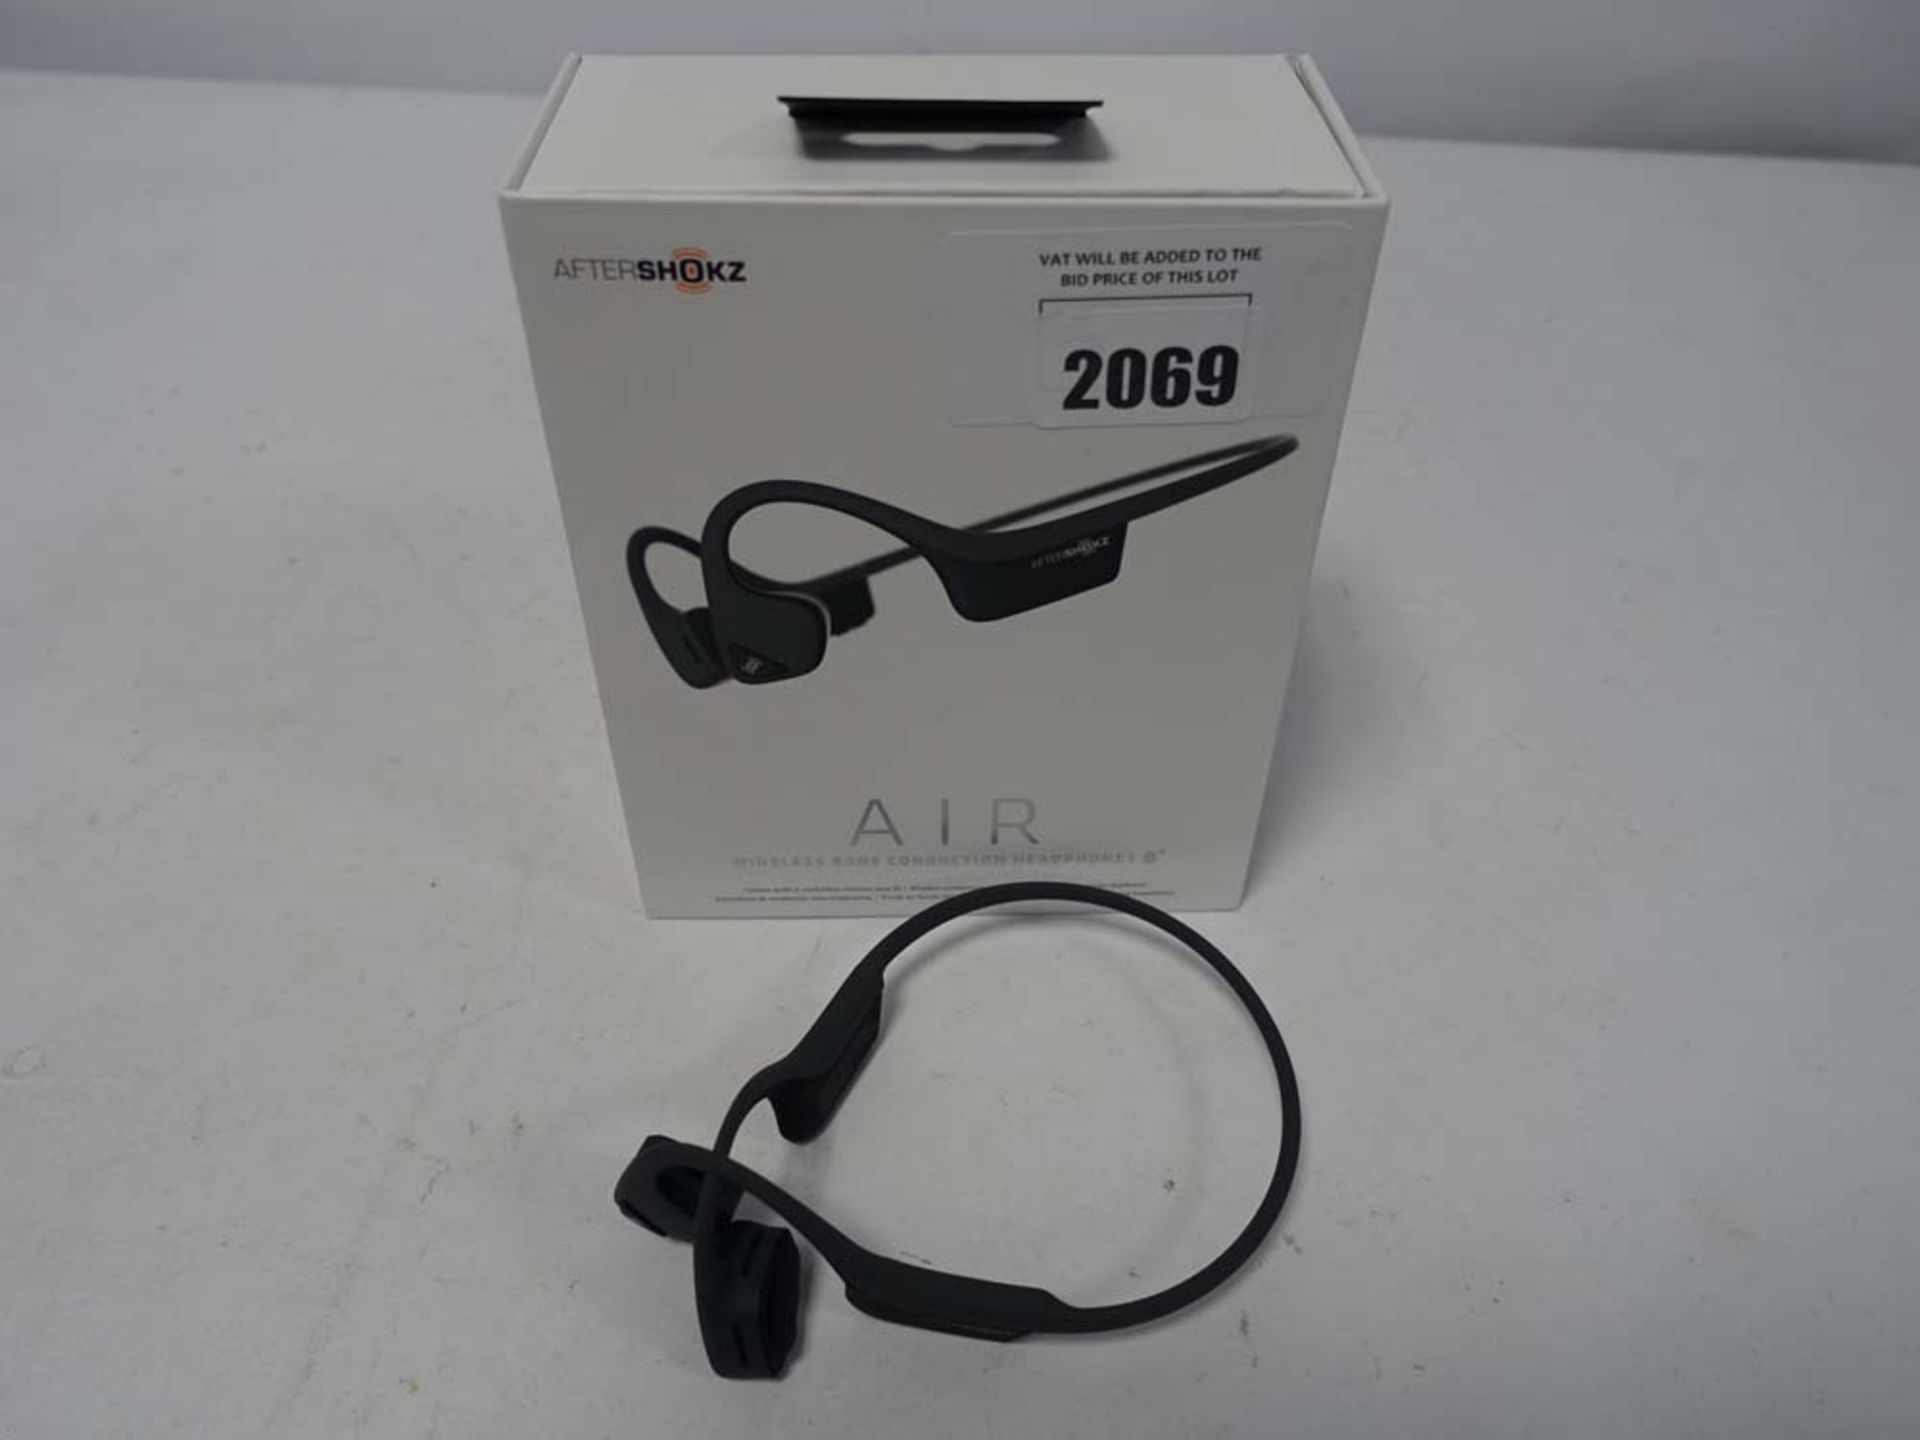 Aftershokx Air Bone conduction headset boxed.